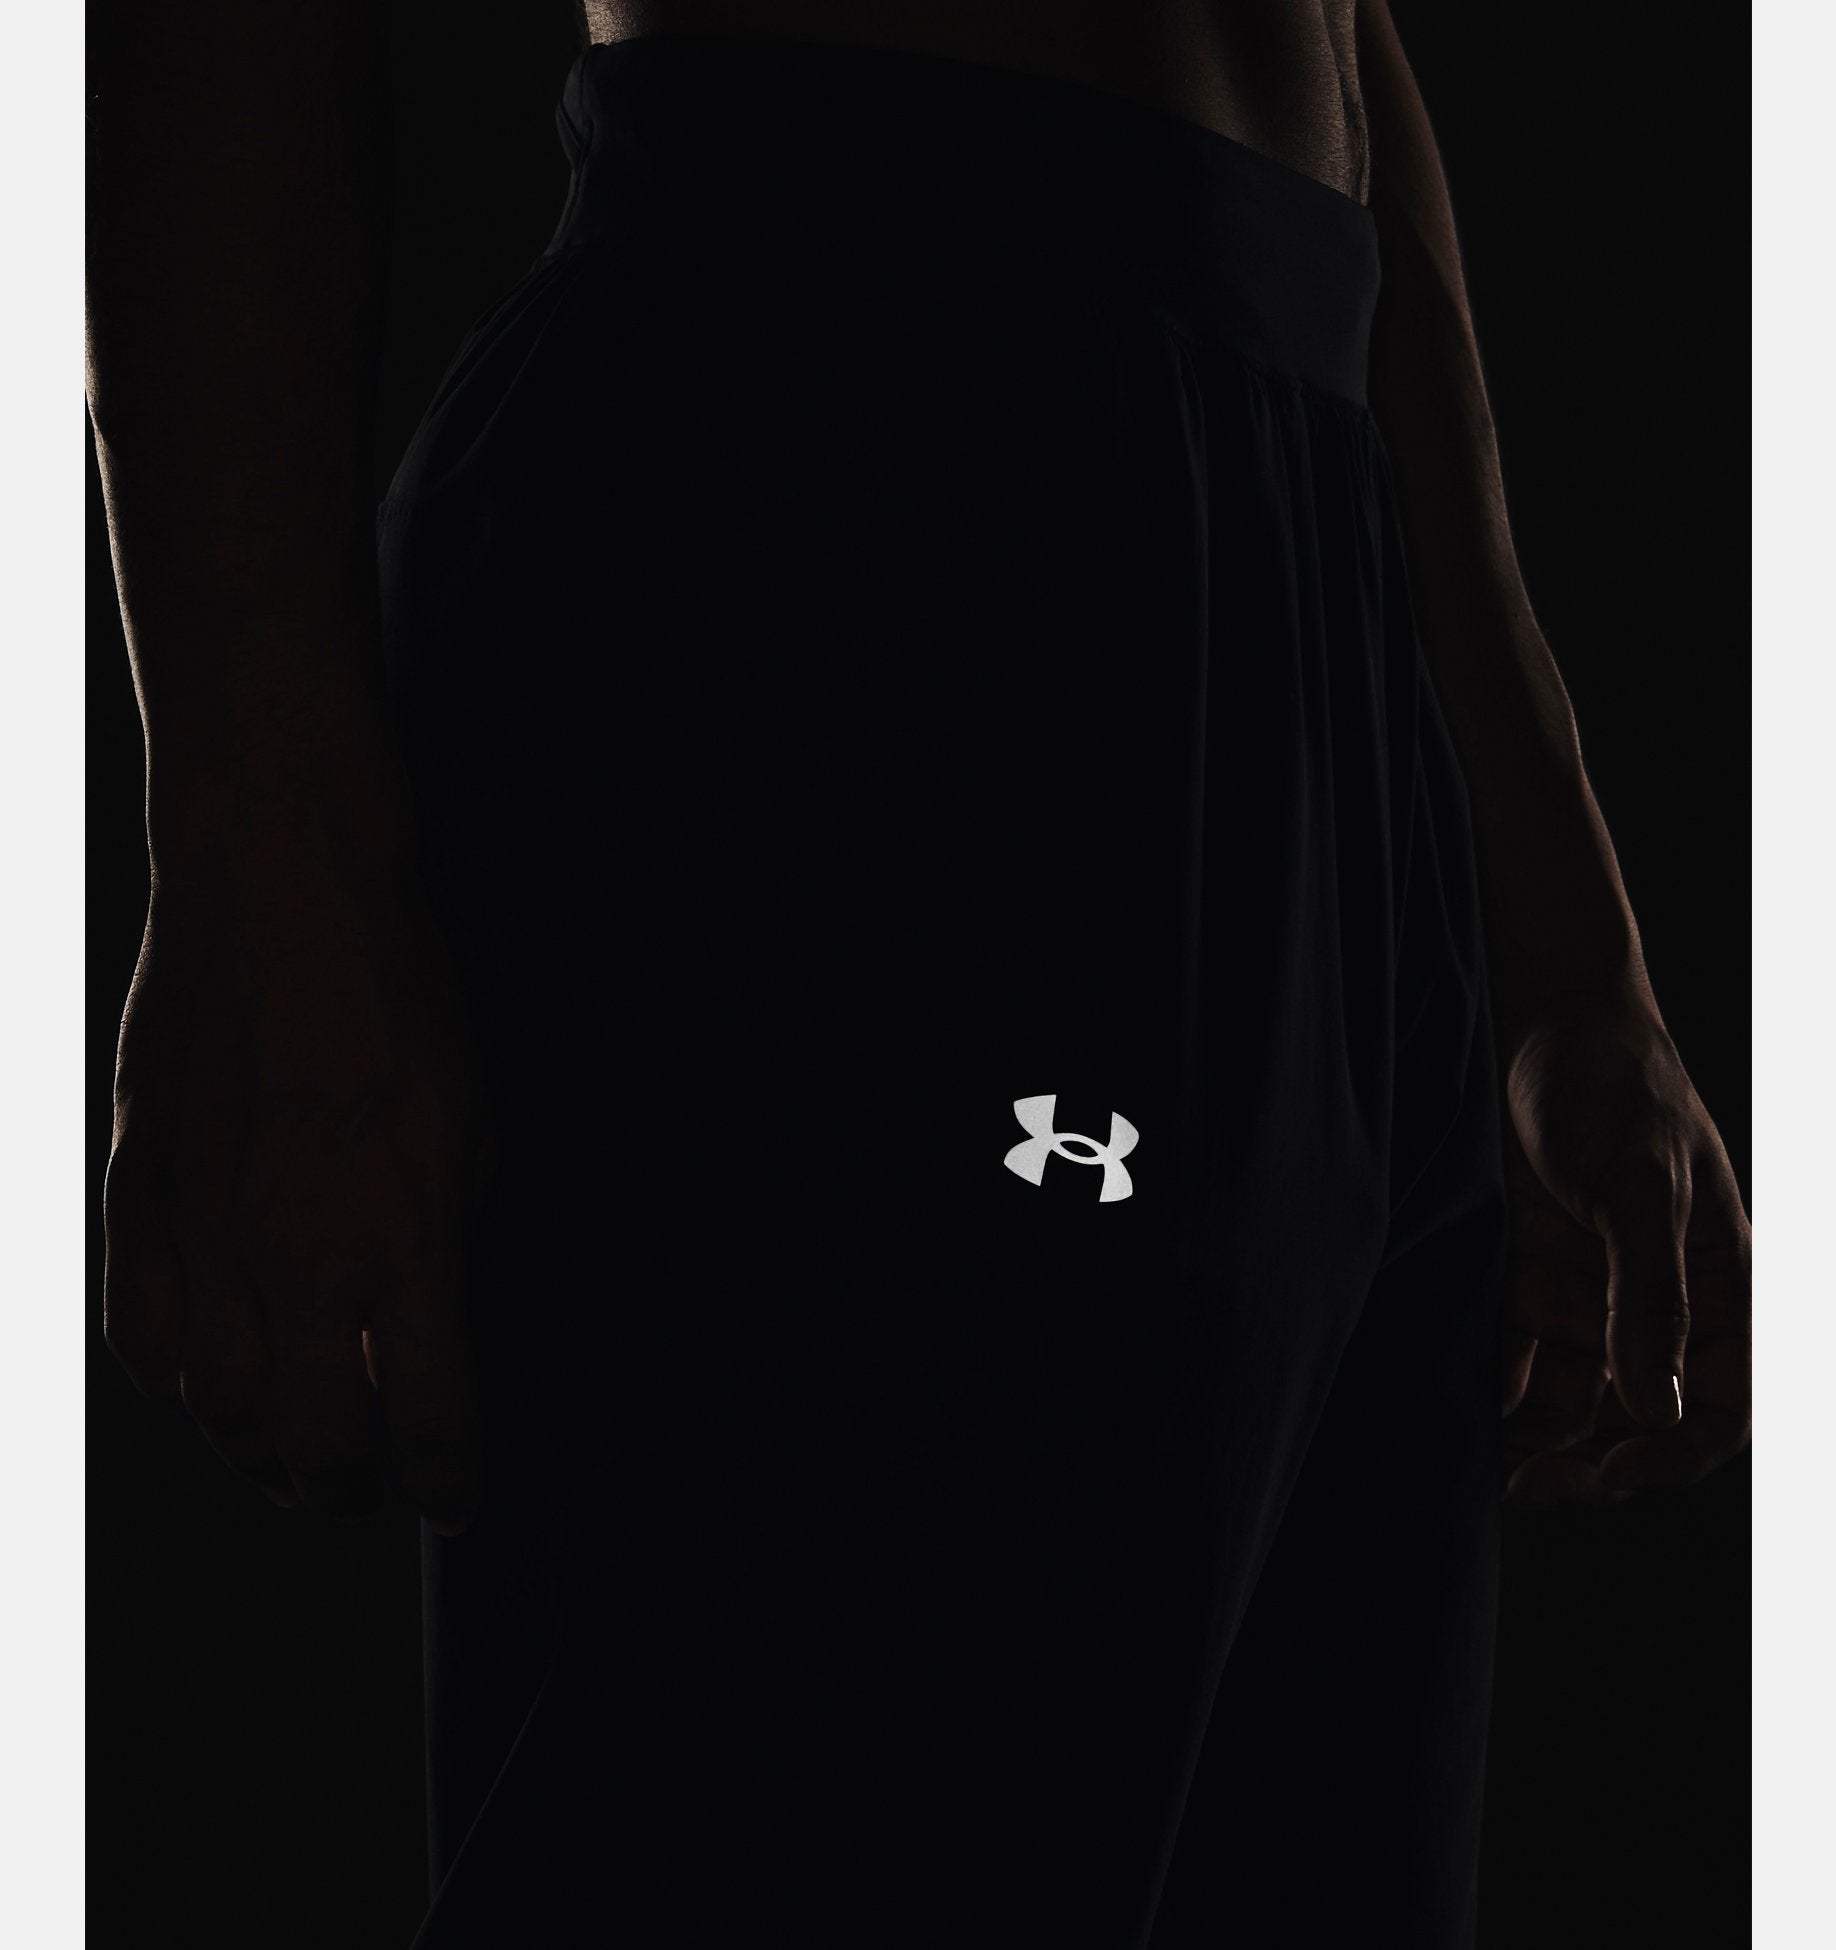 Under Armour UA OutRun the STORM - Softshell trousers - Men's